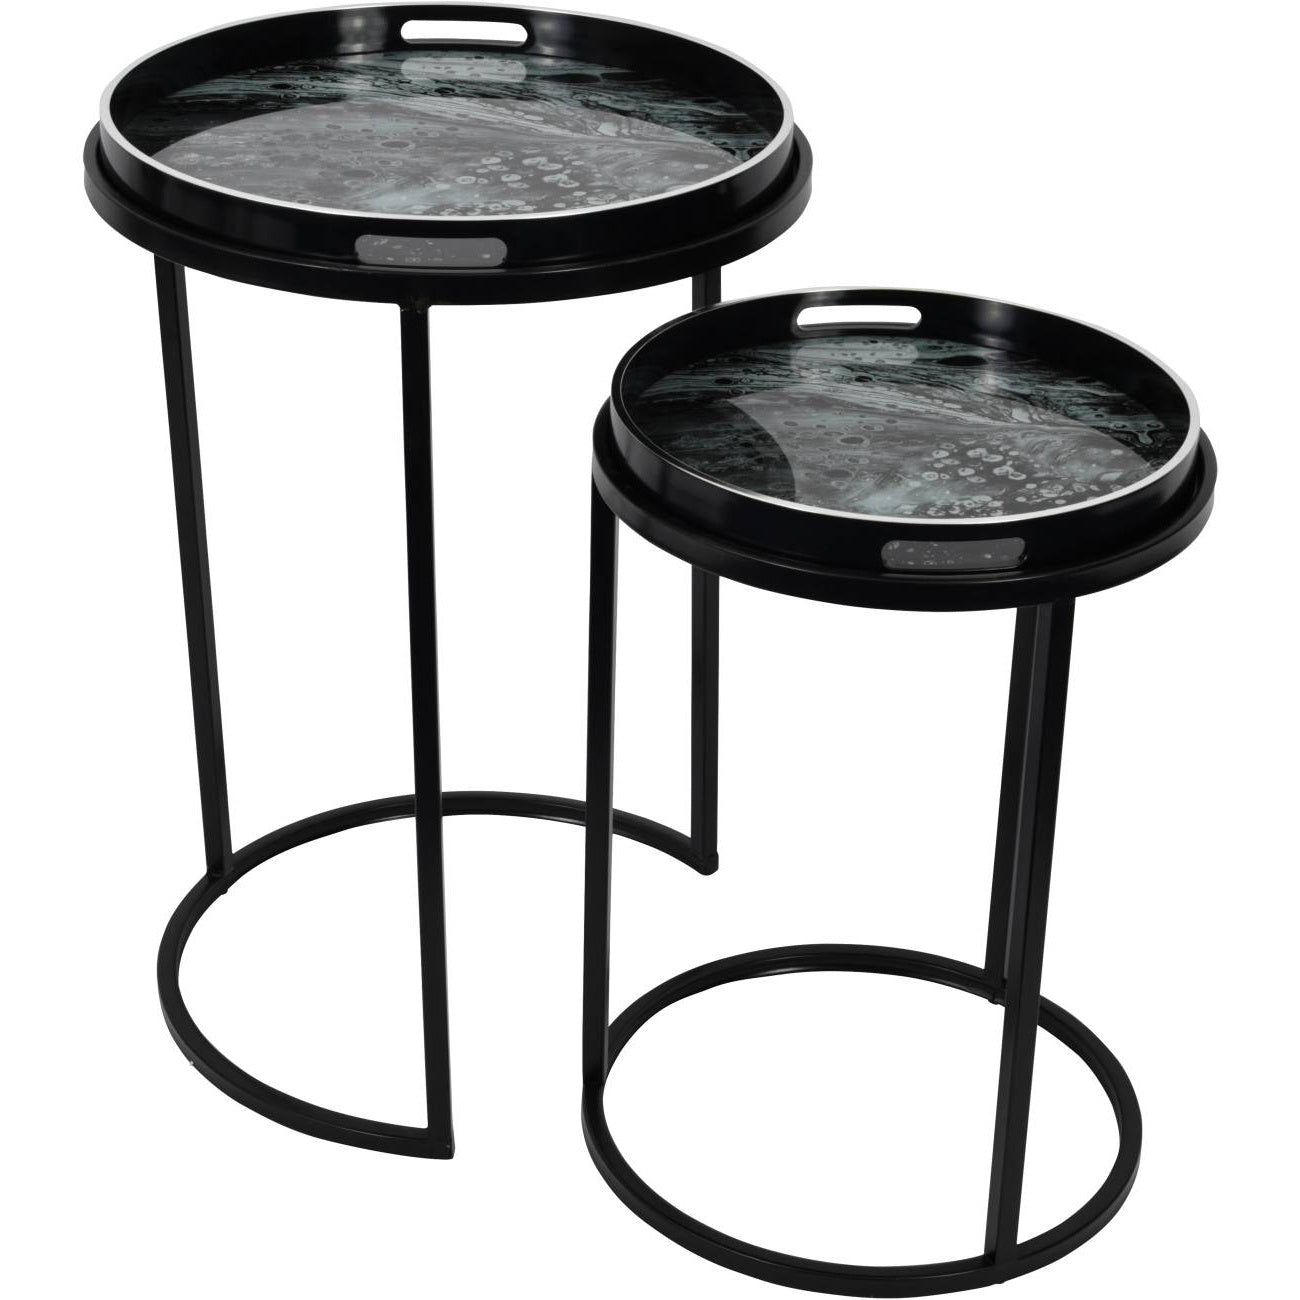 Monochrome Swirl Set of Two Side Tables - Pavilion Interiors